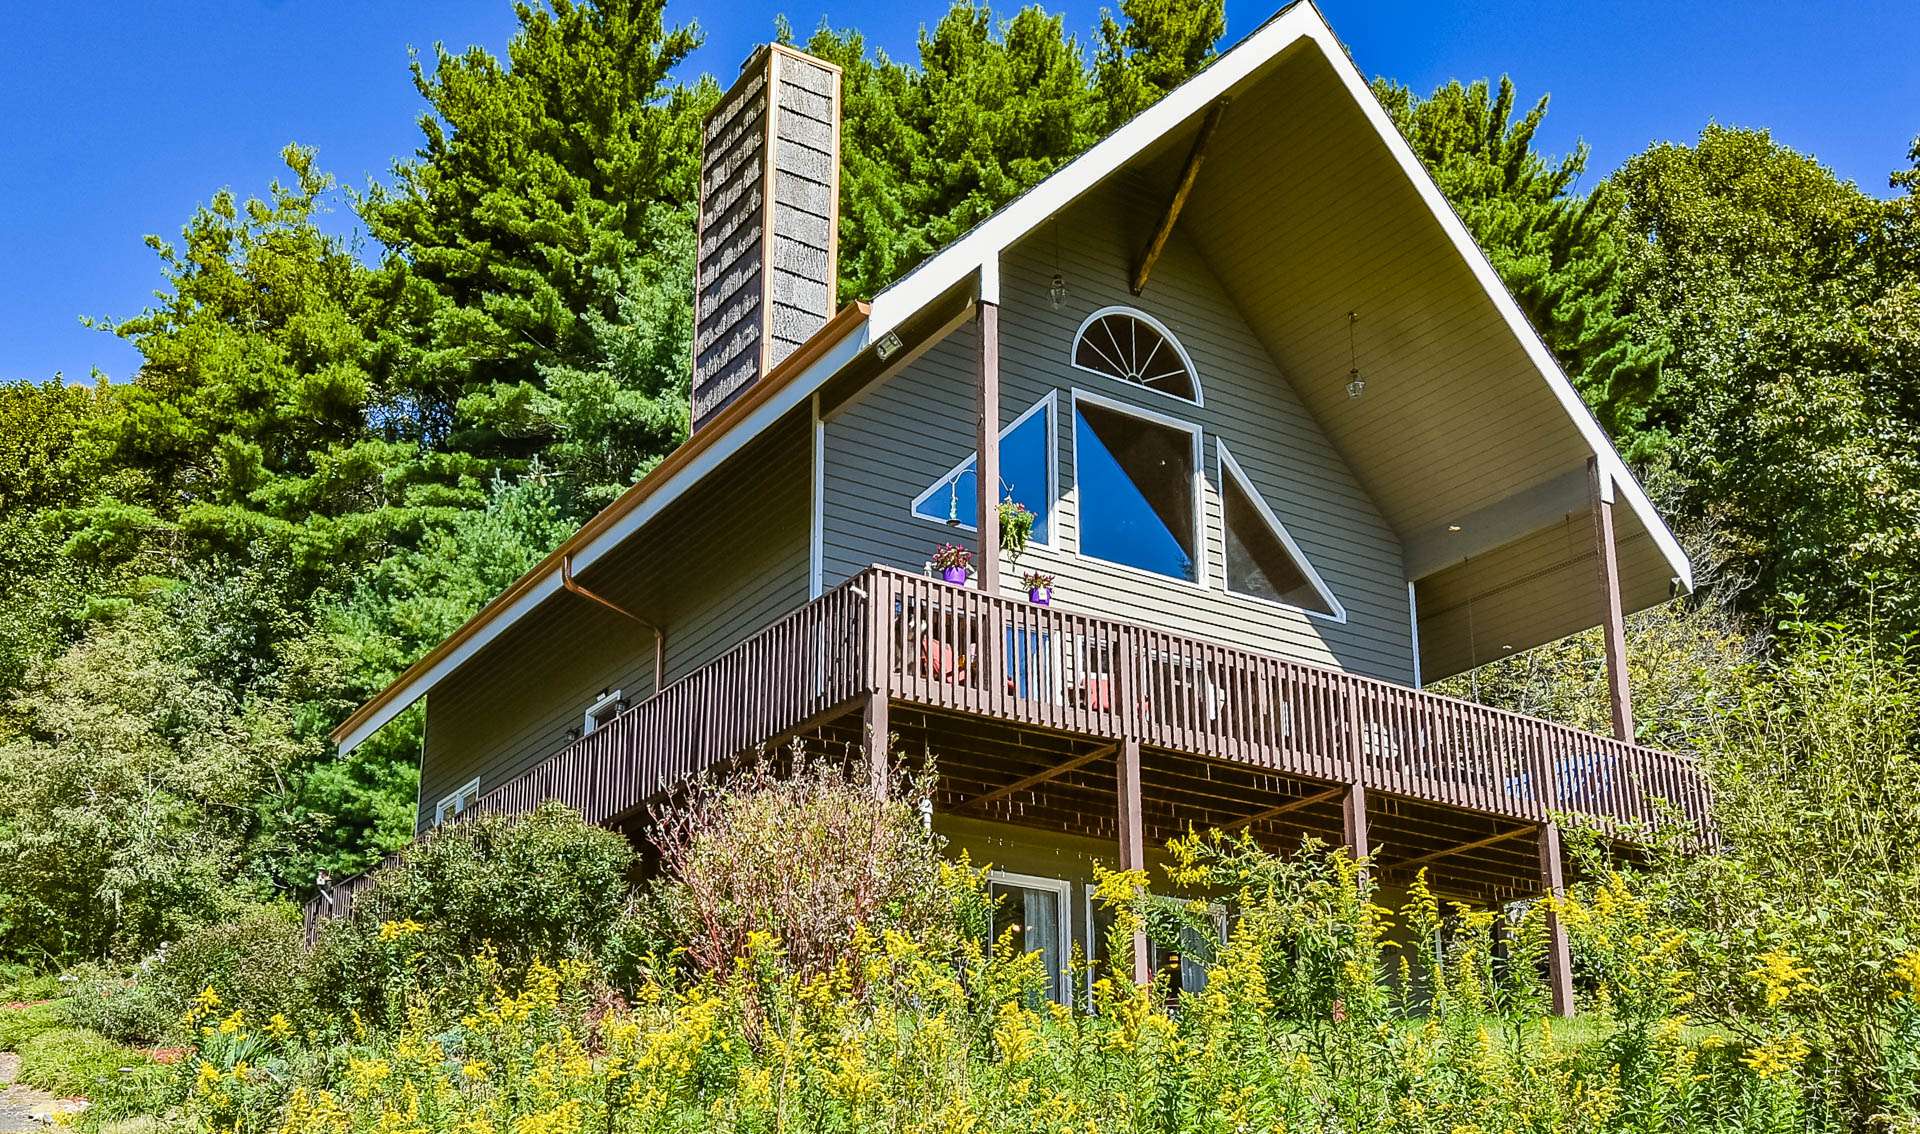 This 2-bedroom, plus two bonus rooms, 3-bath mountain home nestled in a 7+ acre park-like setting just off the Blue Ridge Parkway in the Laurel Springs area of Alleghany County is perfect for your mountain retreat or primary residence.